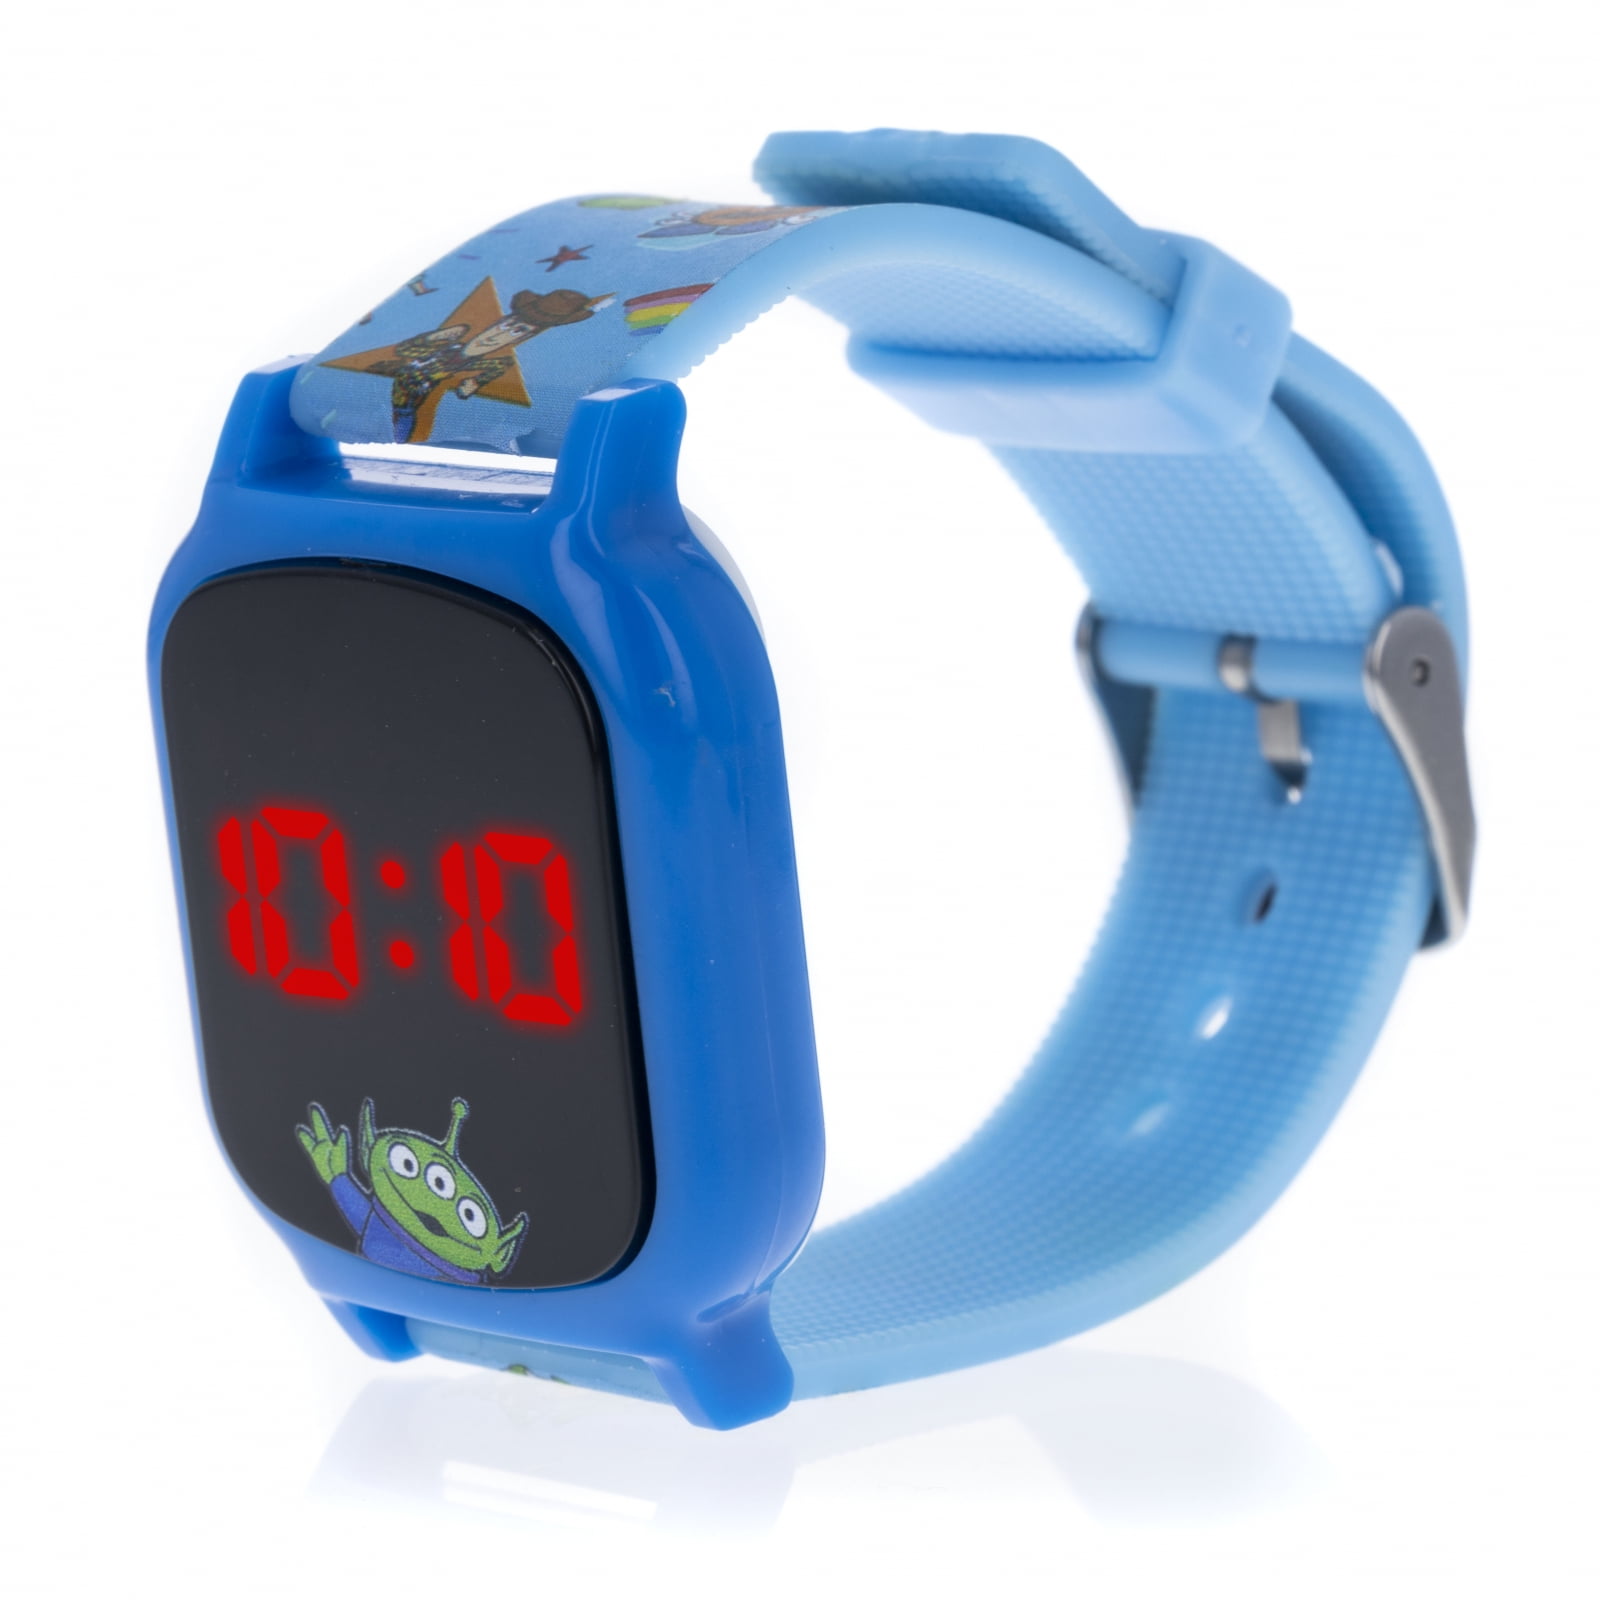  Accutime Disney Lilo and Stitch Interactive Kids smartwatch in  Aqua Color with Selfie Camera, 6 Games, 10 Different dial Faces and Many  More : Electronics